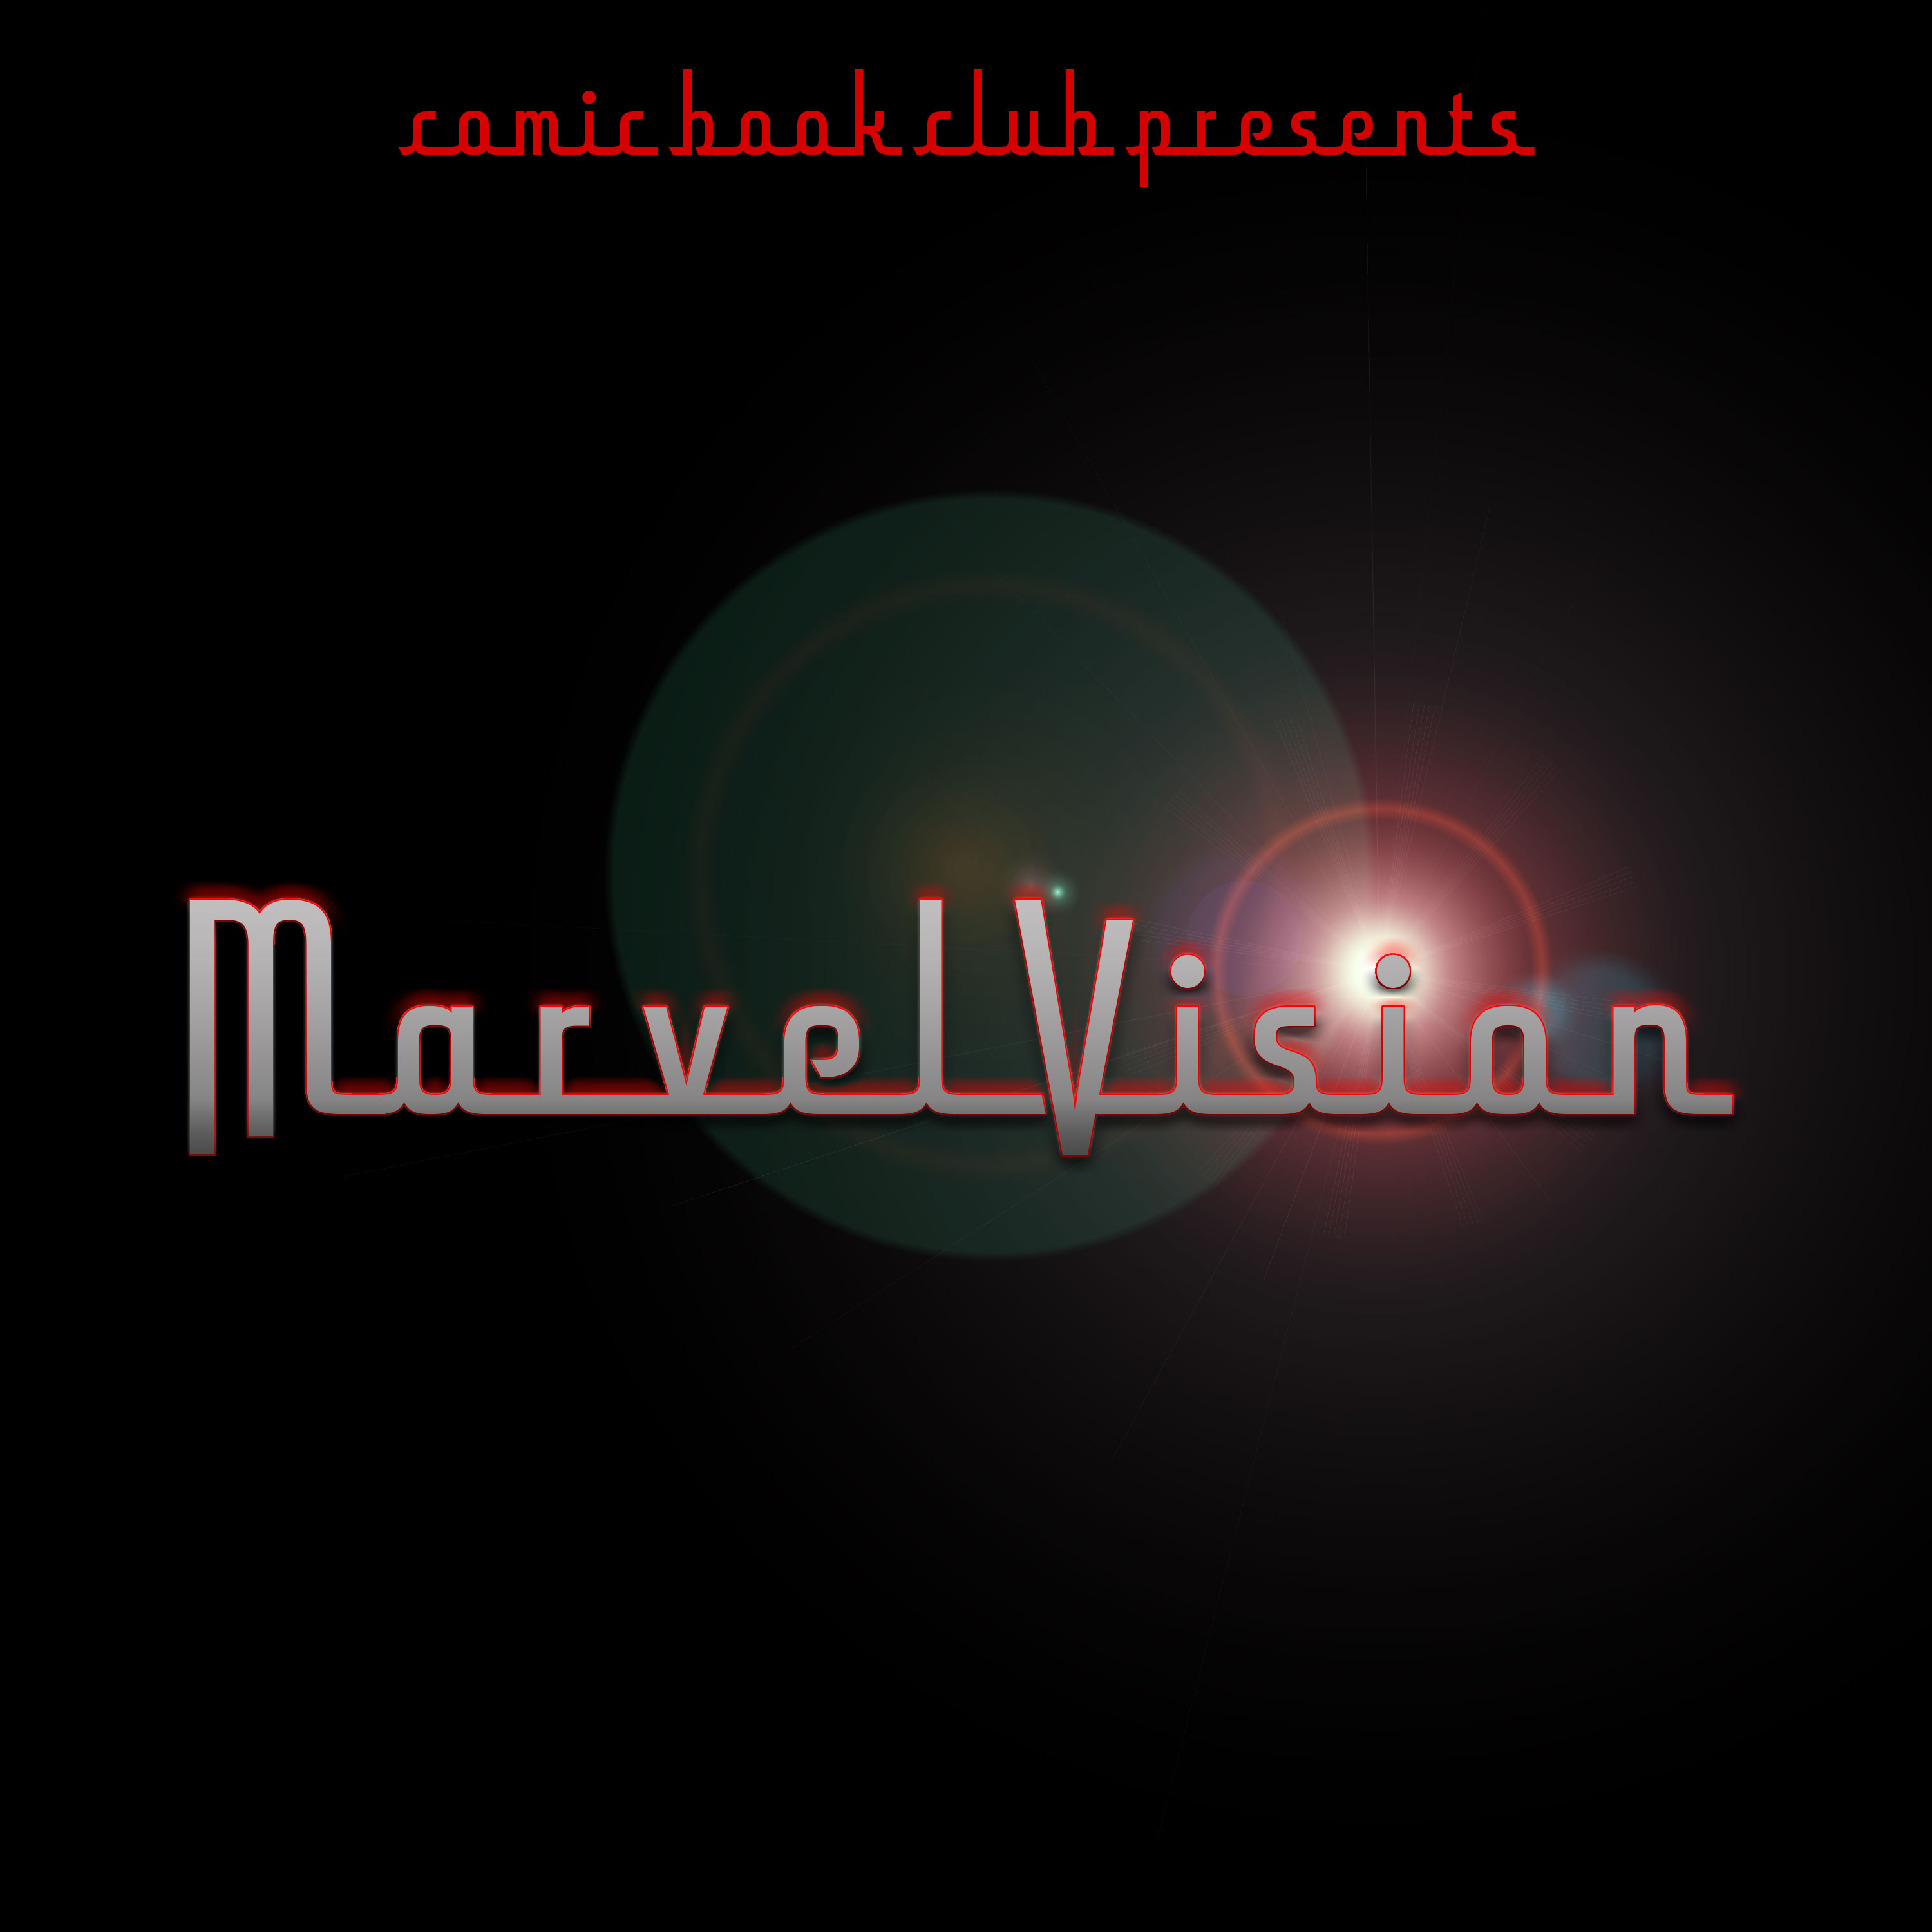 Ms. Marvel, Episode 4: “Seeing Red”